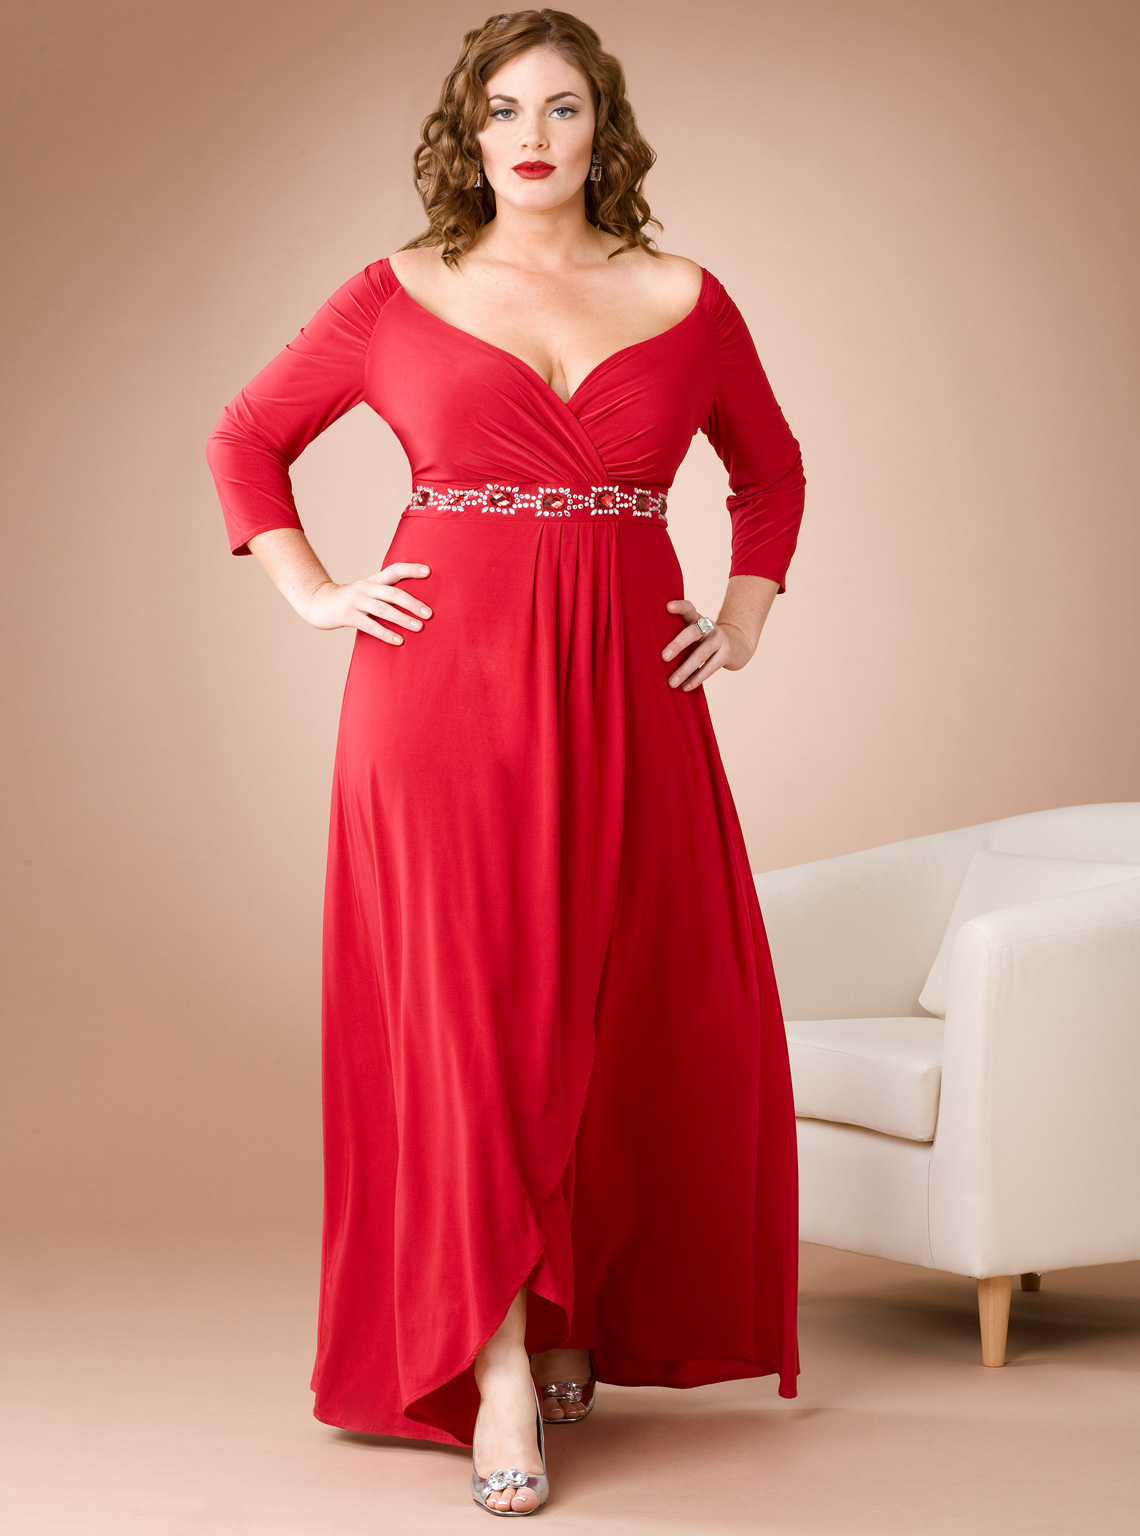 Download this Moda Plus Size Dicas Modelos picture